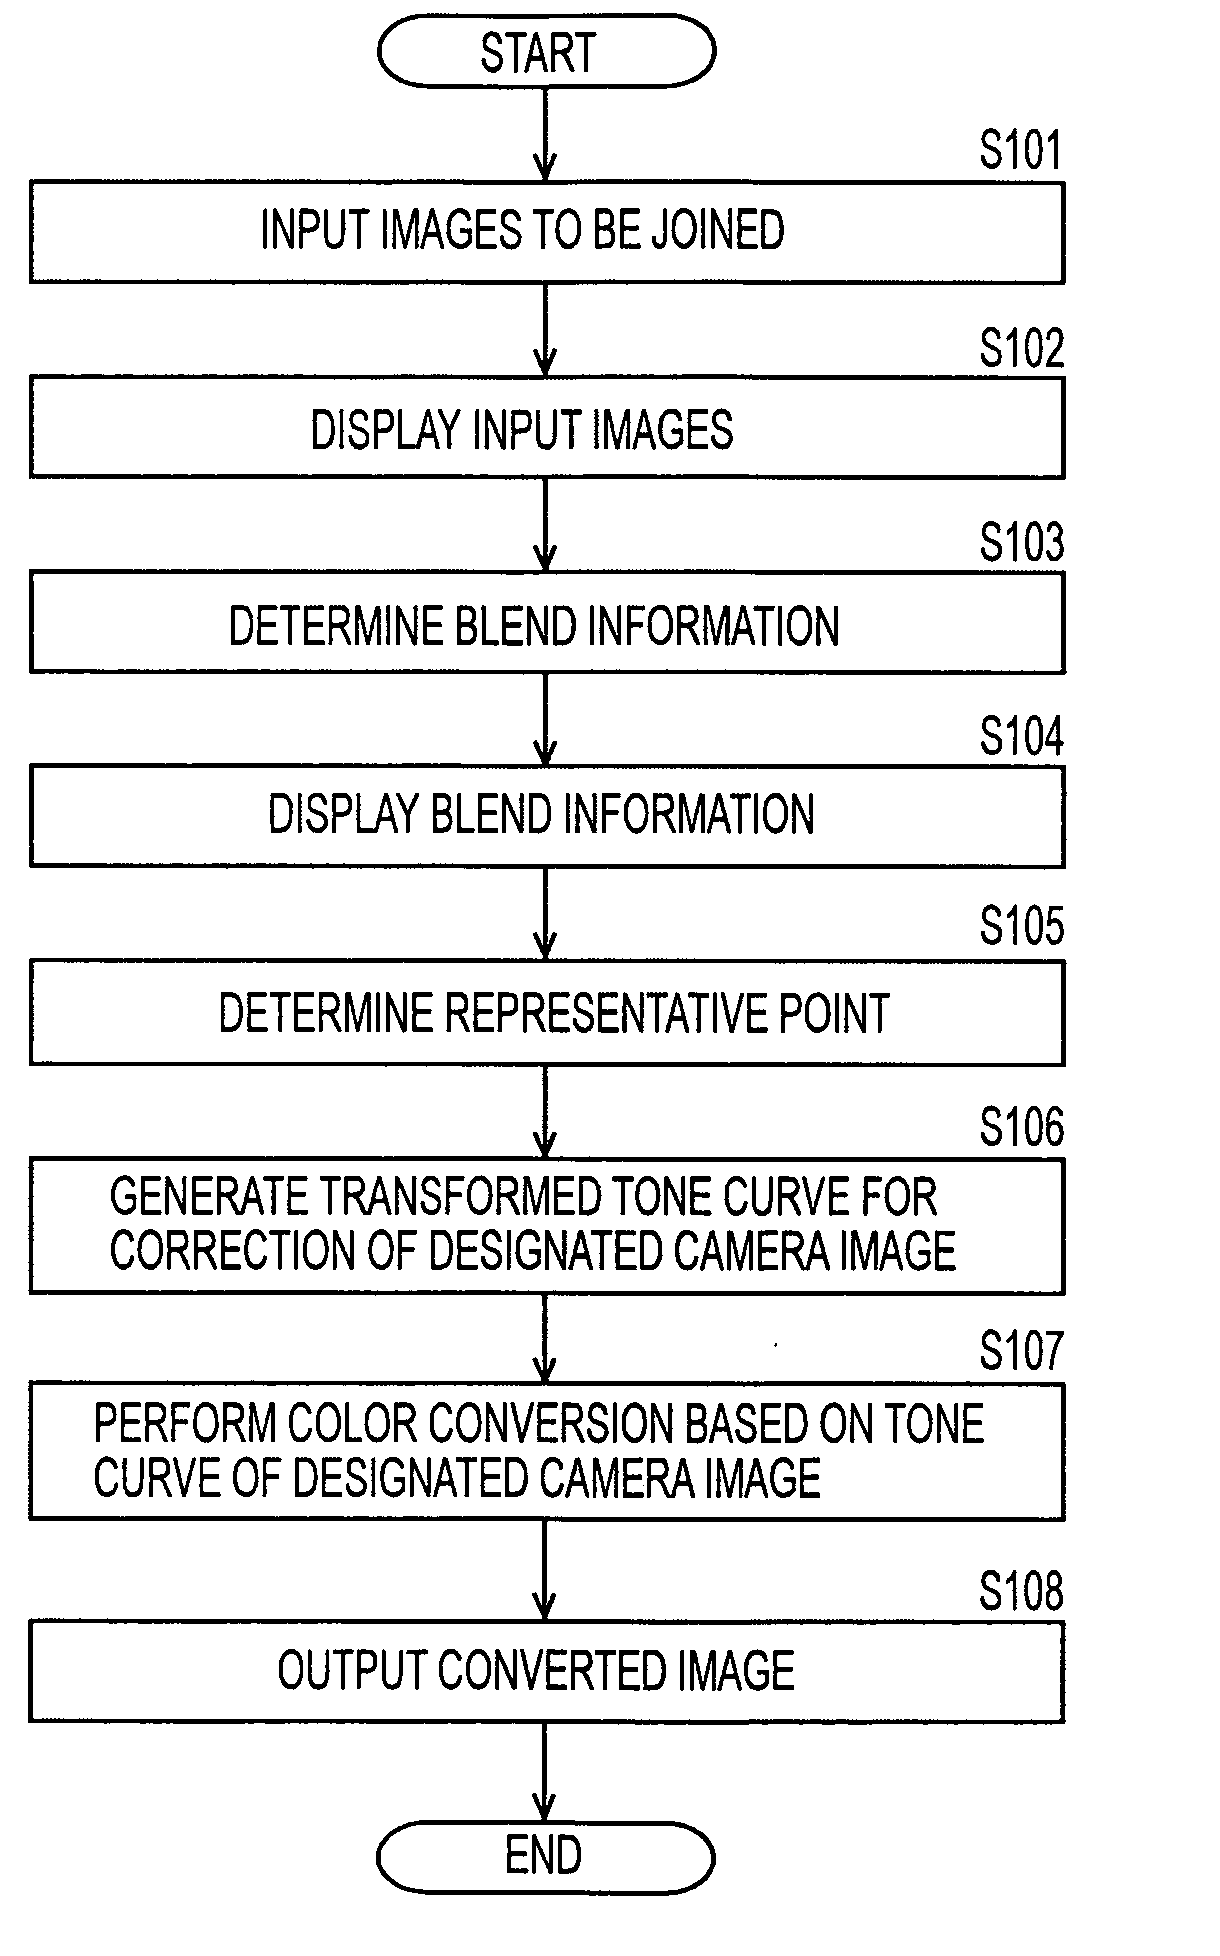 Image processing apparatus and method, and computer program